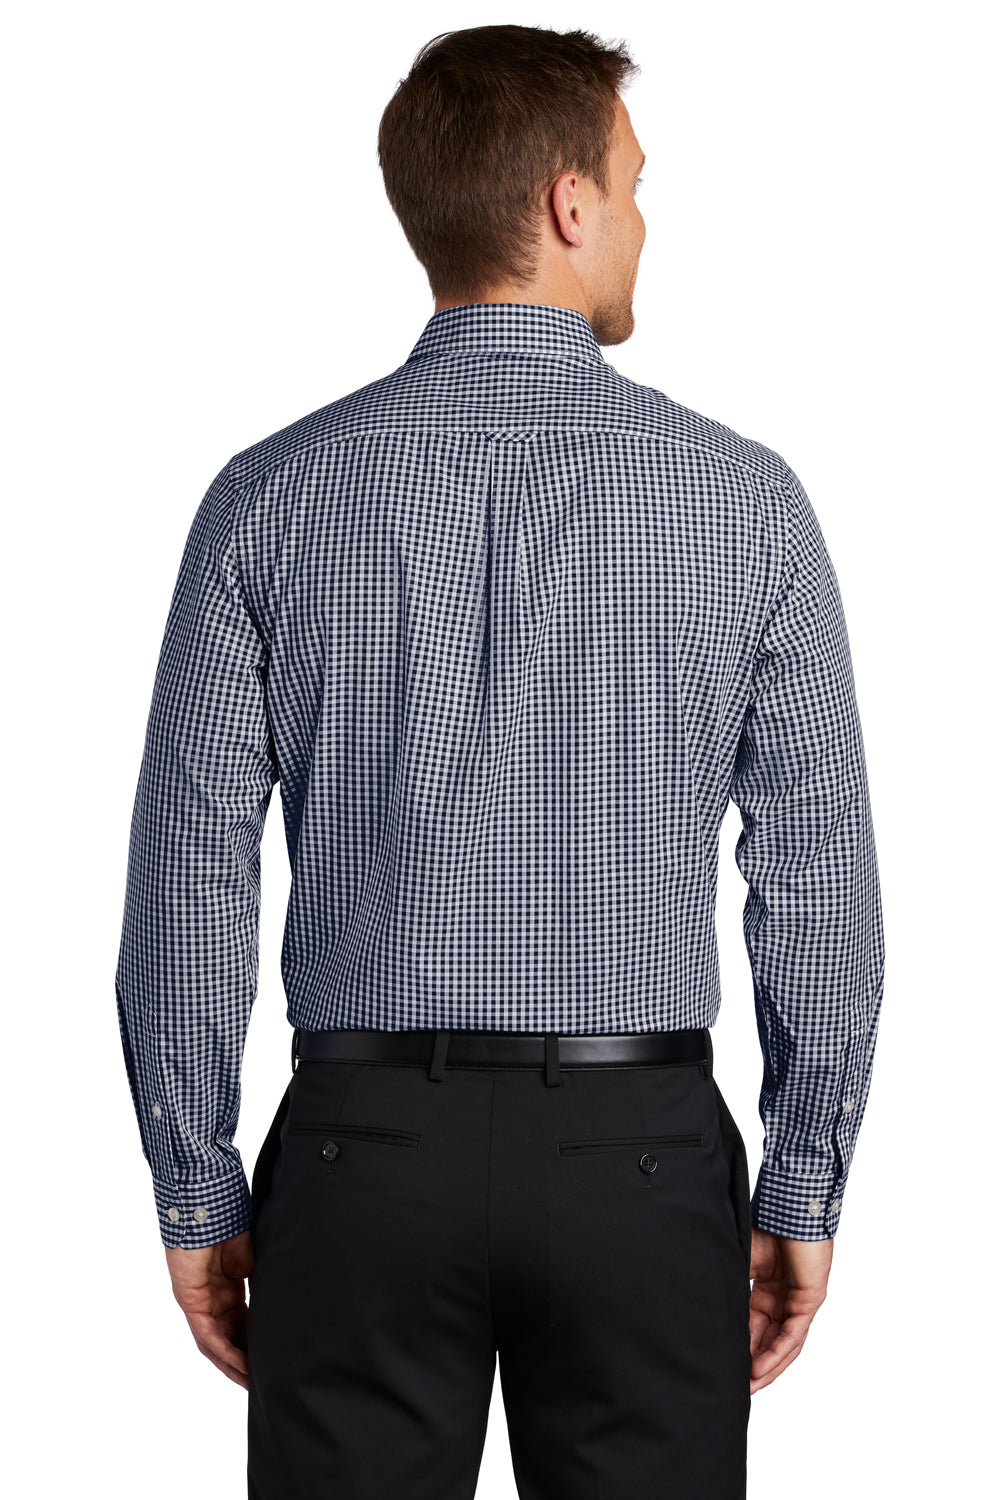 Port Authority Mens Broadcloth Gingham Long Sleeve Button Down Shirt w/ Pocket True Navy Blue/White Side